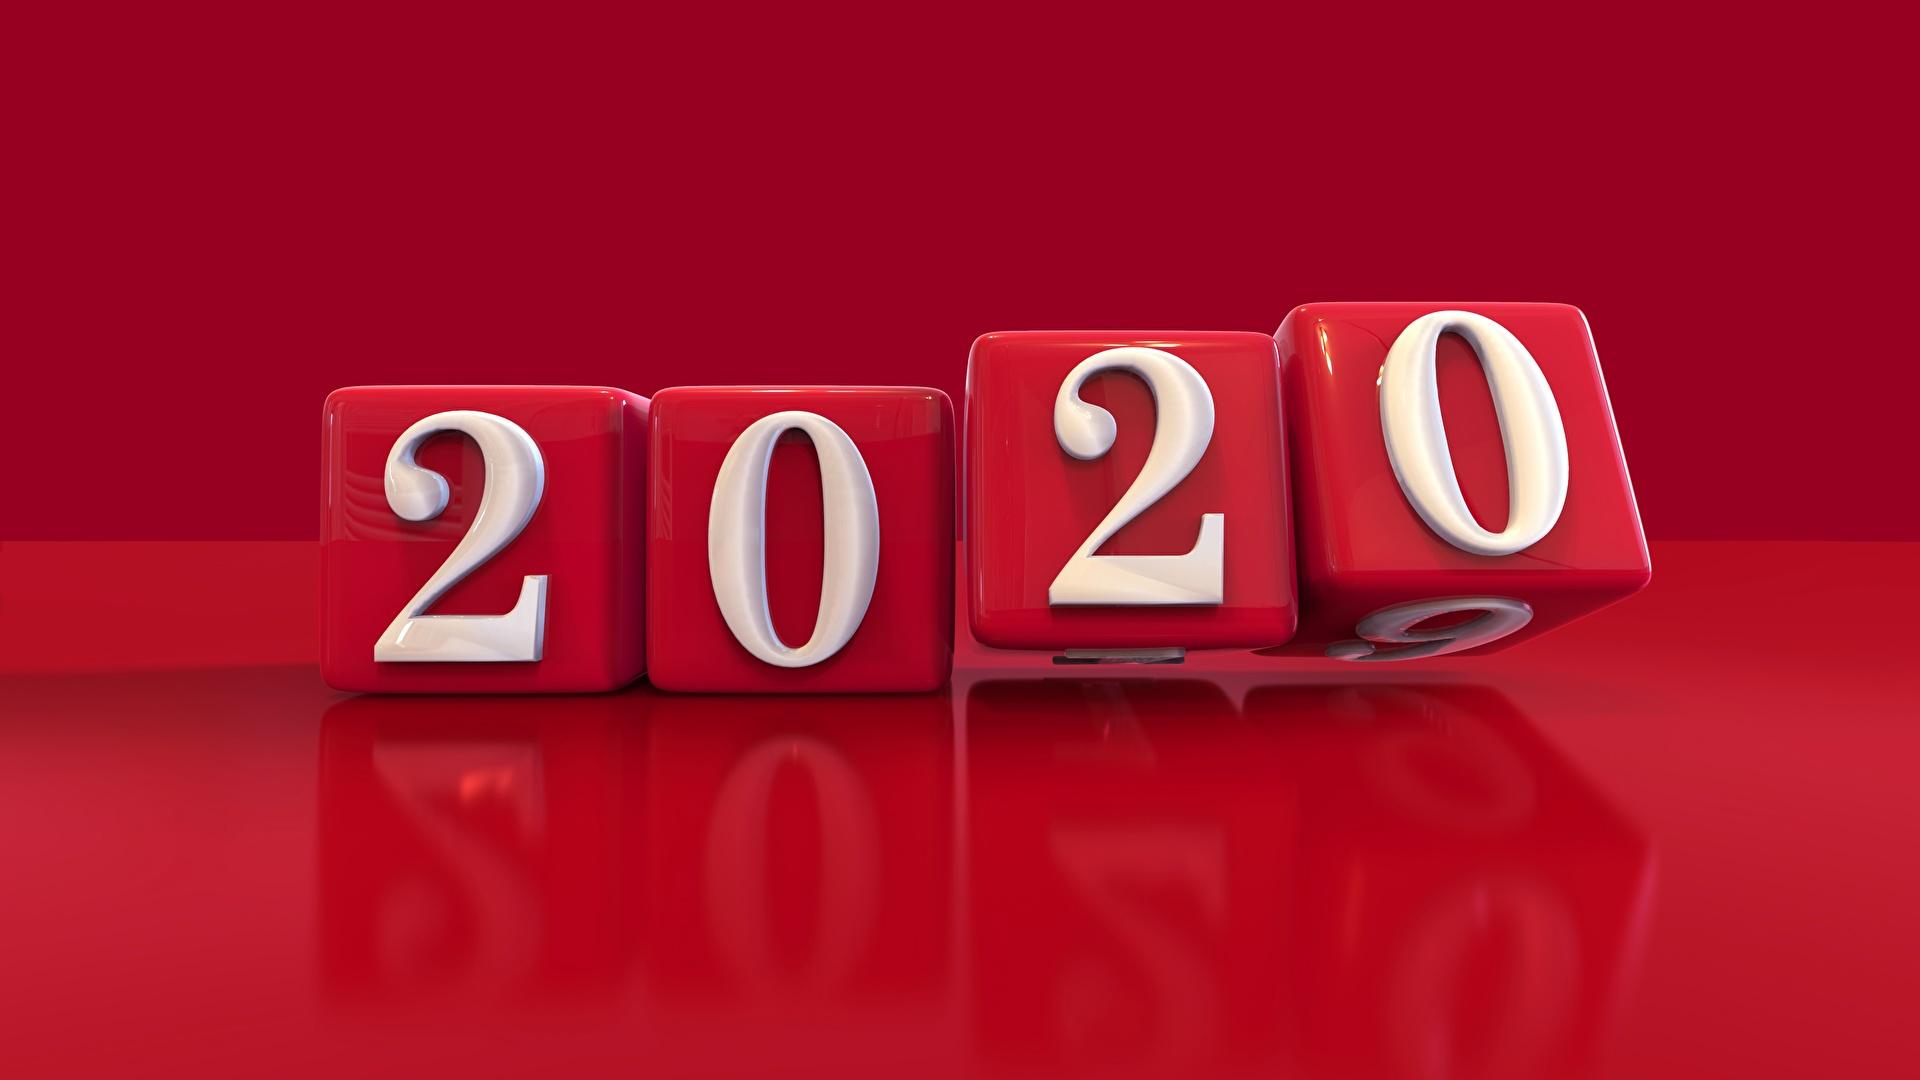 Photos 2020 New year 3D Graphics 1920x1080